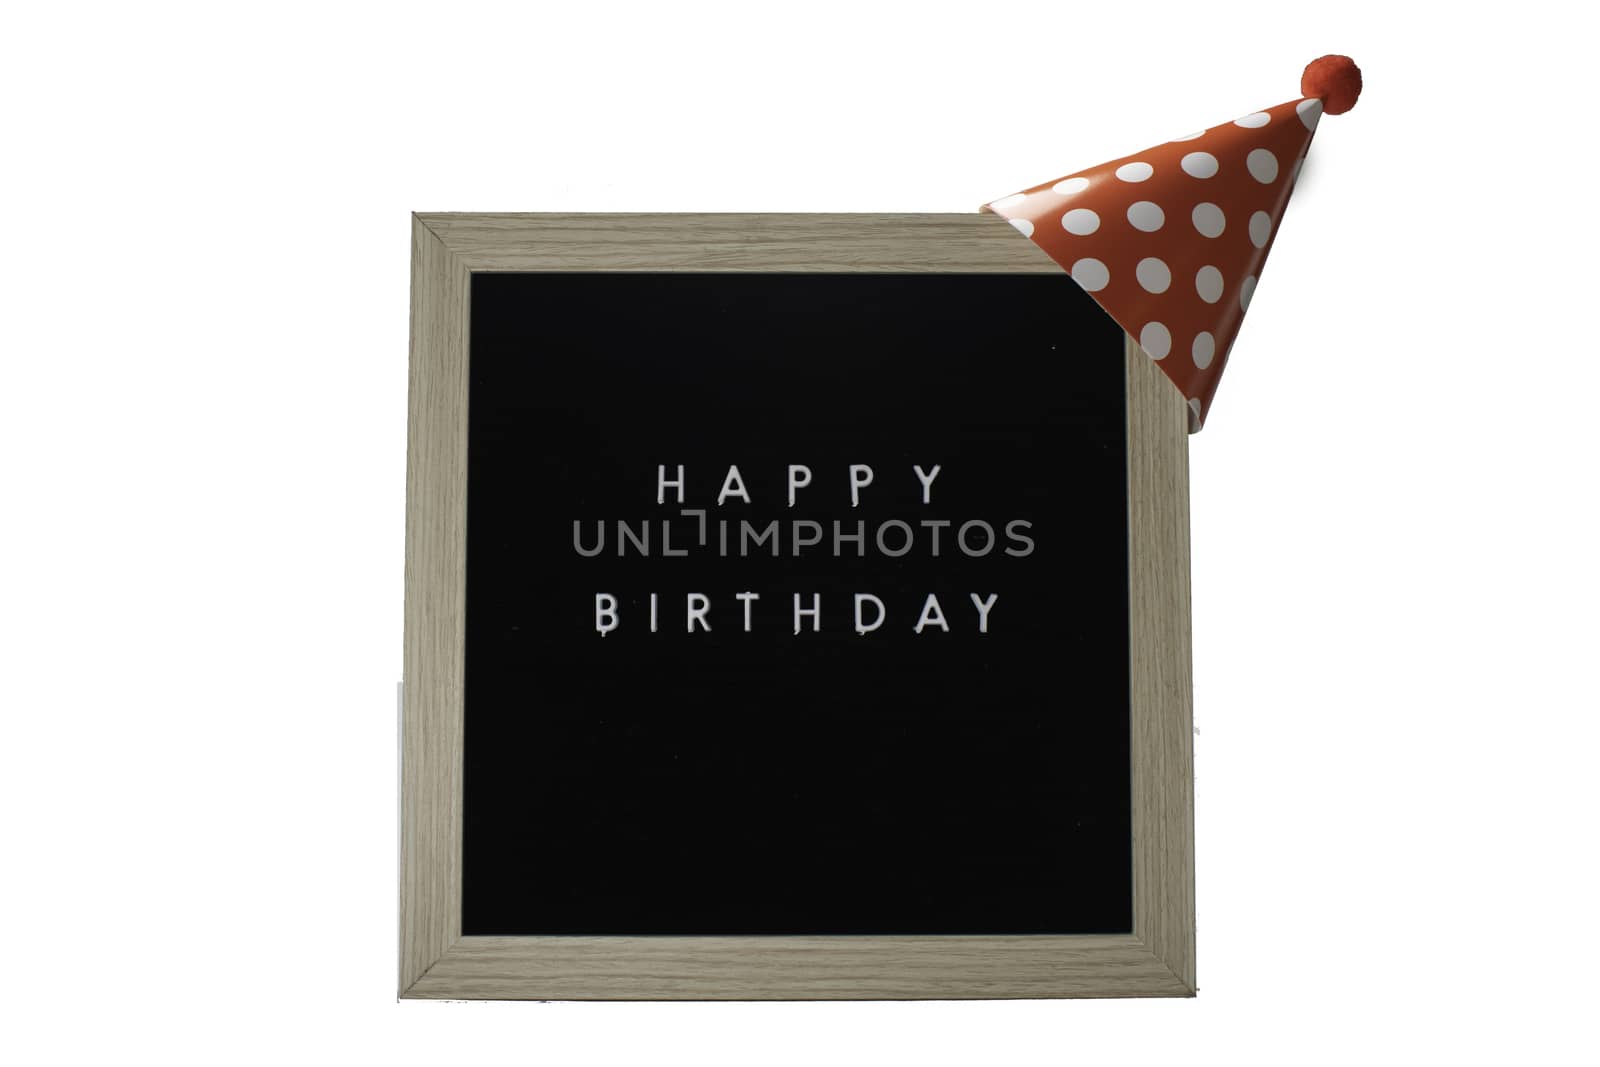 A Birch Framed Sign That Says Happy Birthday in White Letters With a Red Party Hat on Top on a Pure White Background